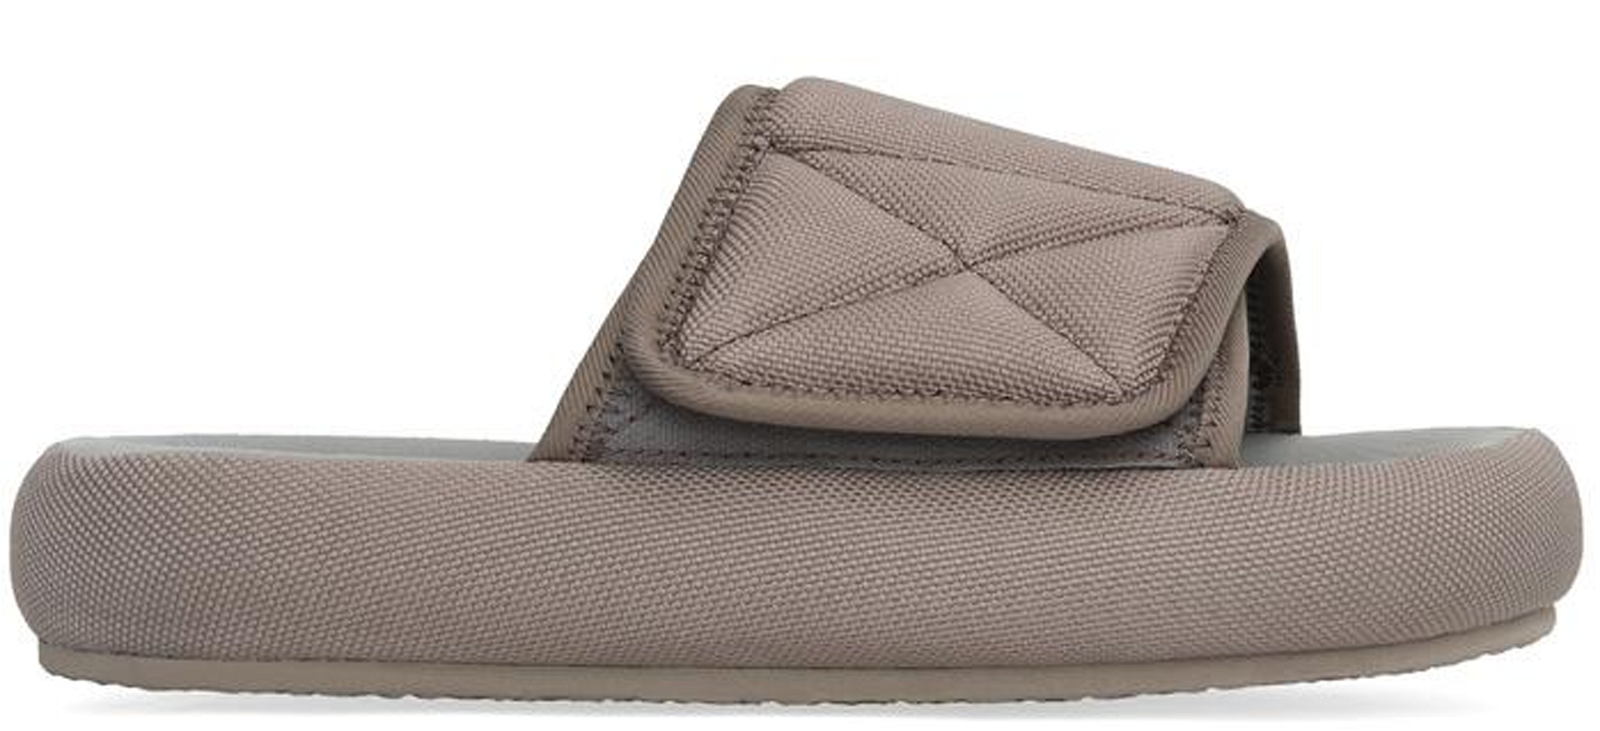 Yeezy Nylon Slippers Taupe (W) sneakers